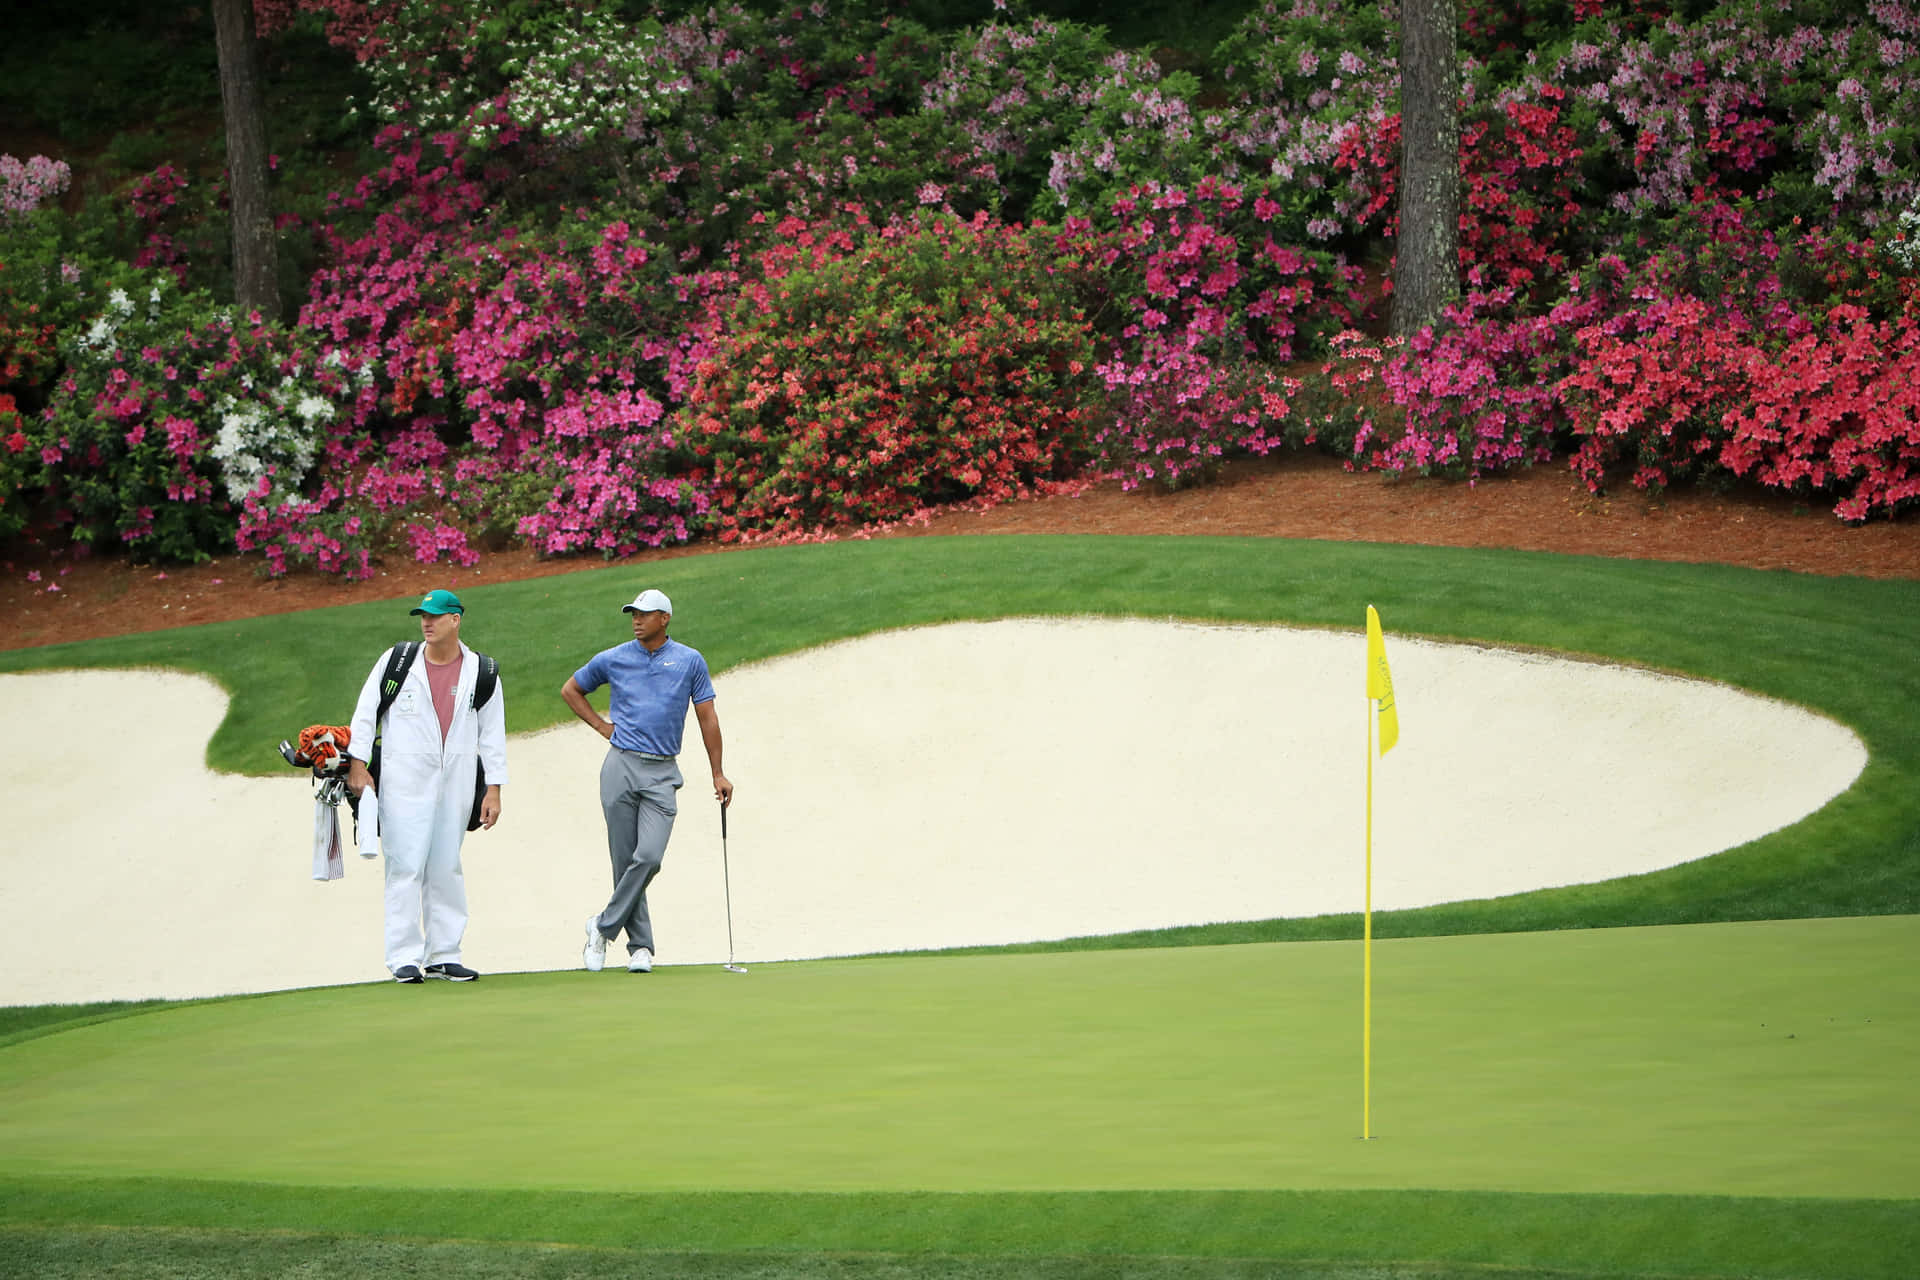 "Experience Augusta National, the iconic golf club, from your iPhone!" Wallpaper